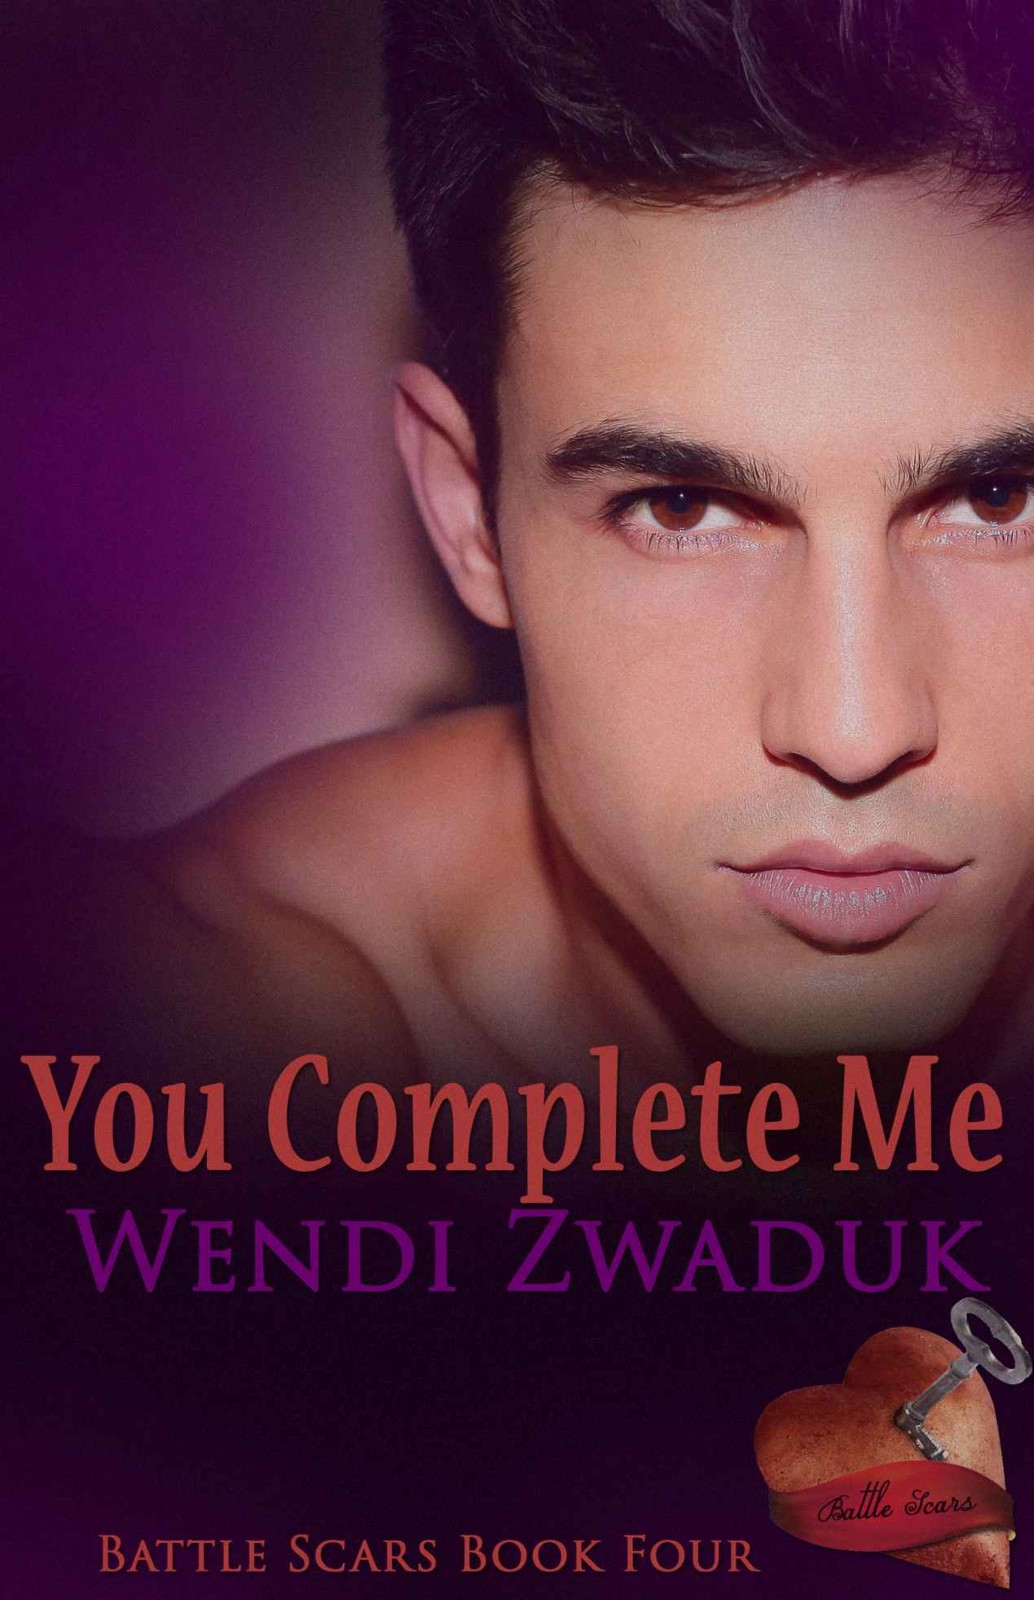 You Complete Me by Wendi Zwaduk